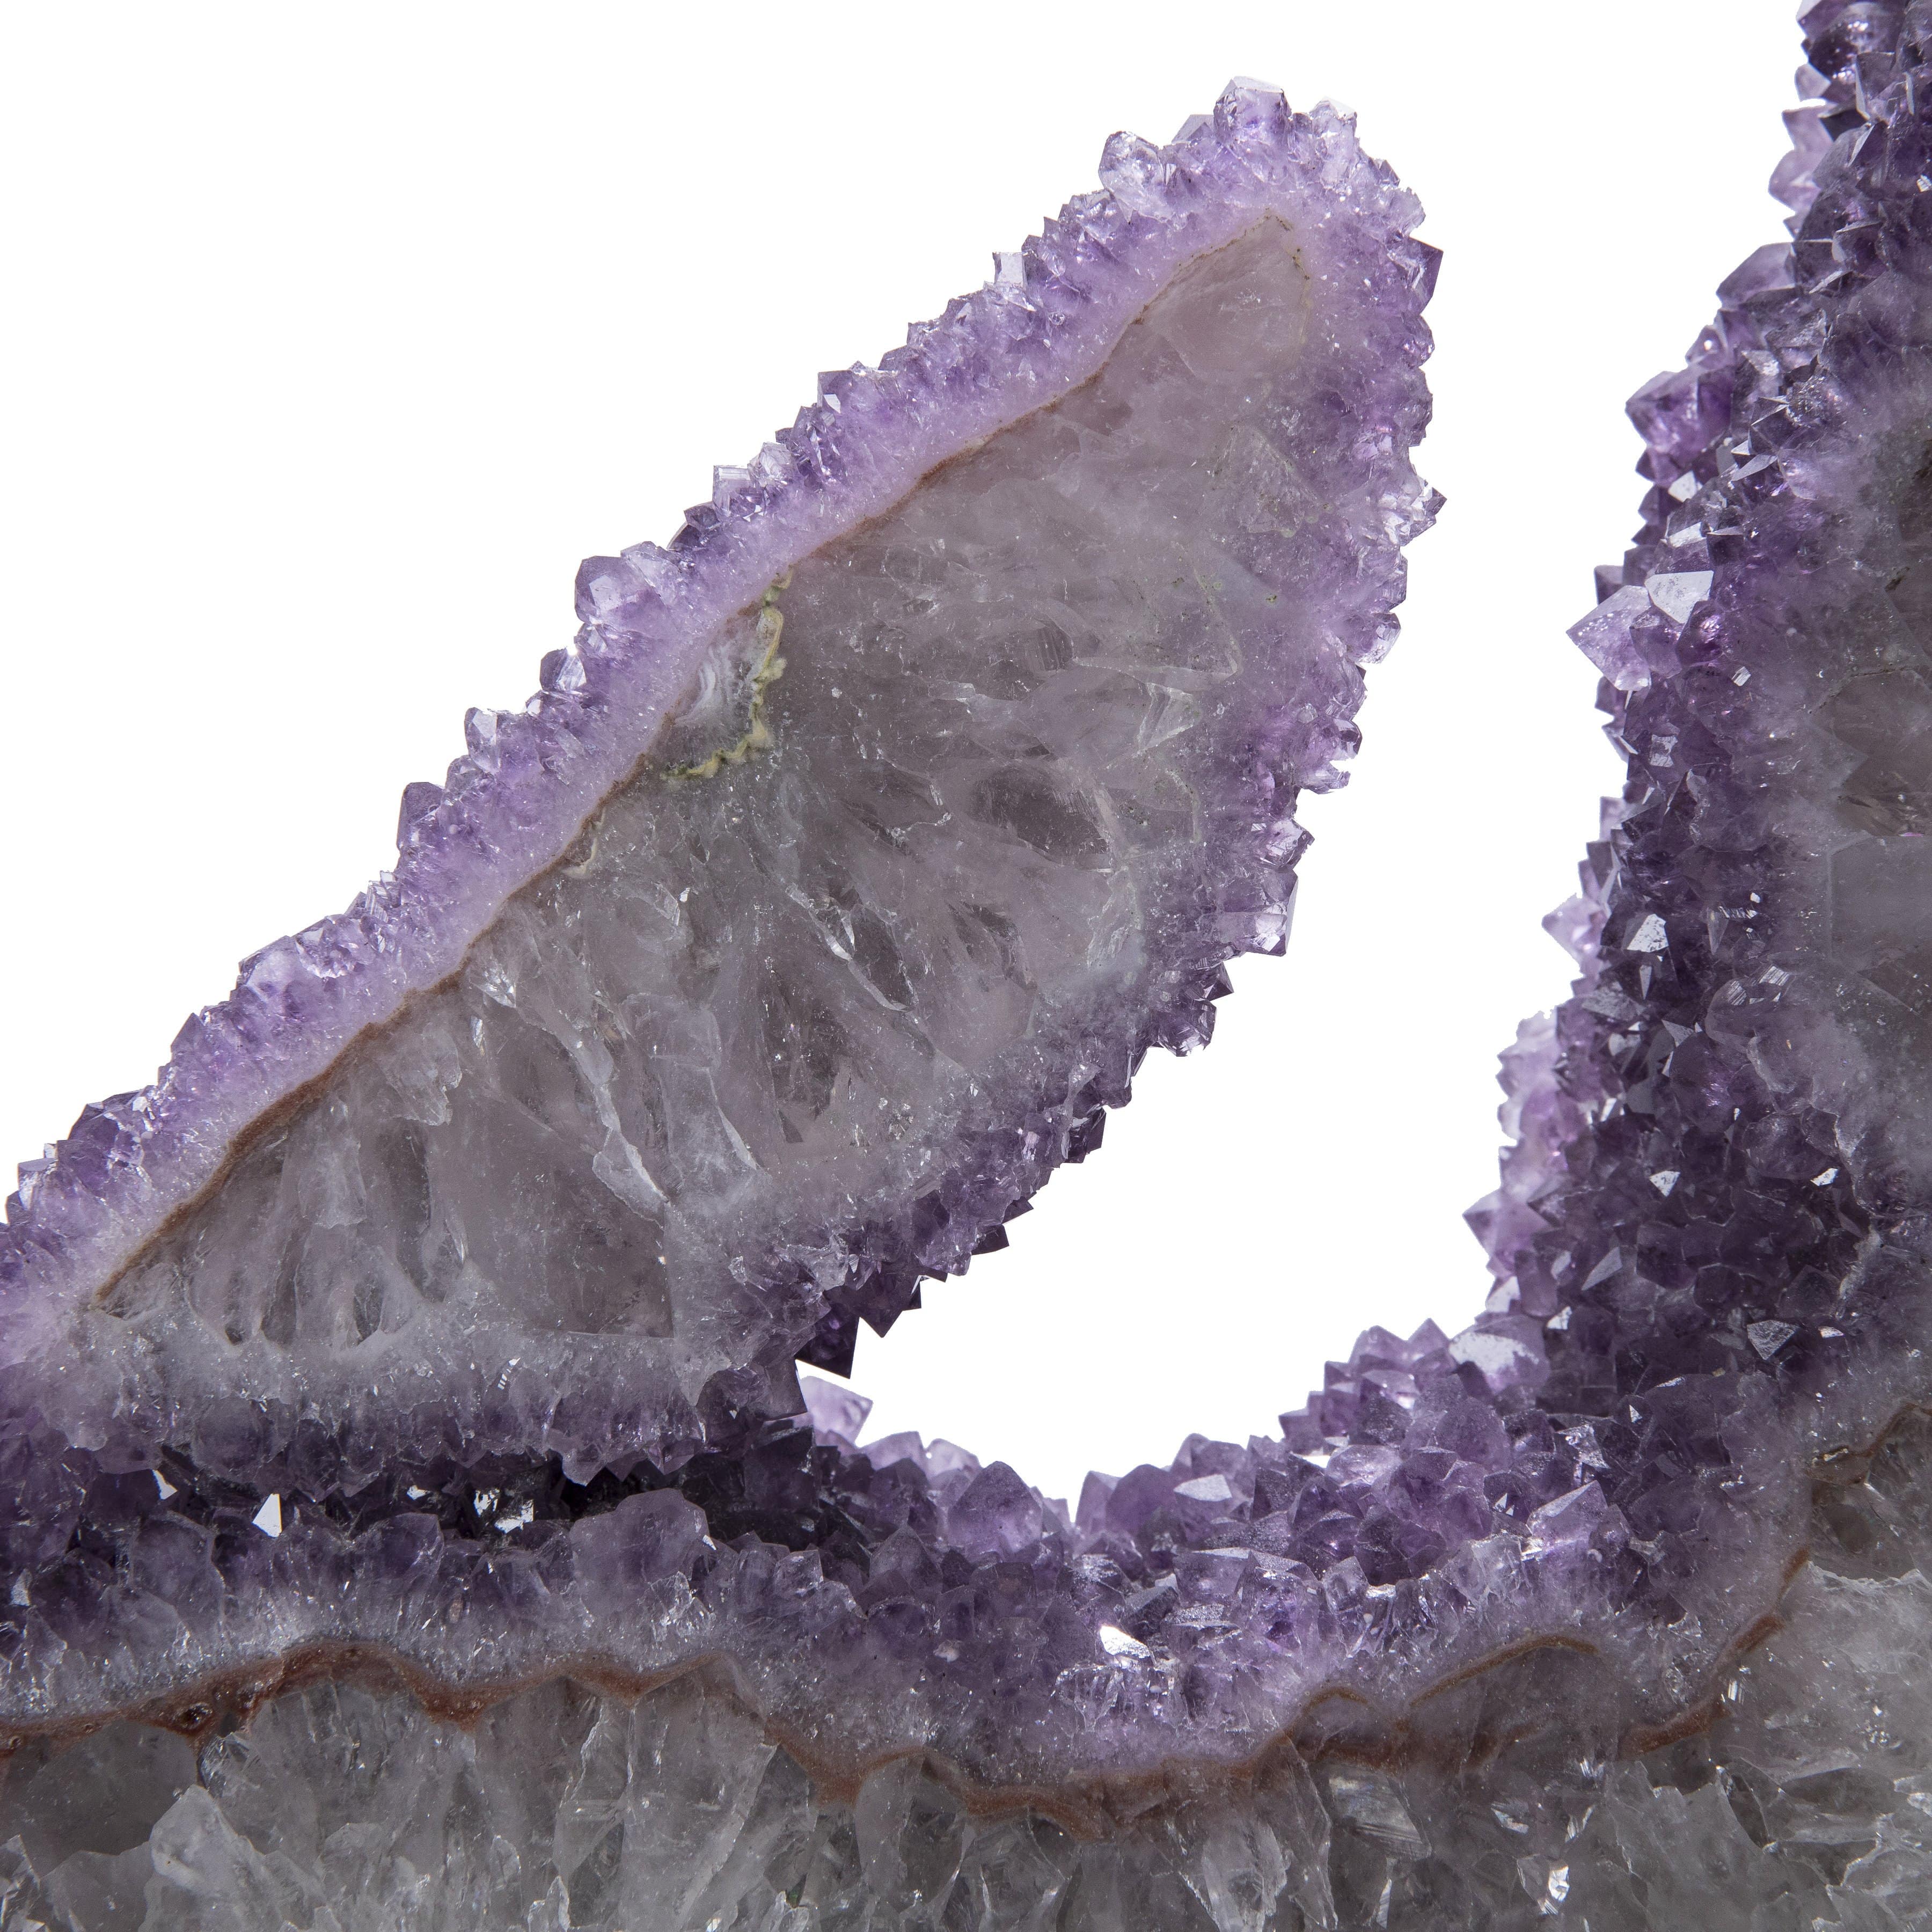 Kalifano Amethyst Natural Brazilian Amethyst Geode Slice on Stand - 46 in / 66 lbs BAG18000.001